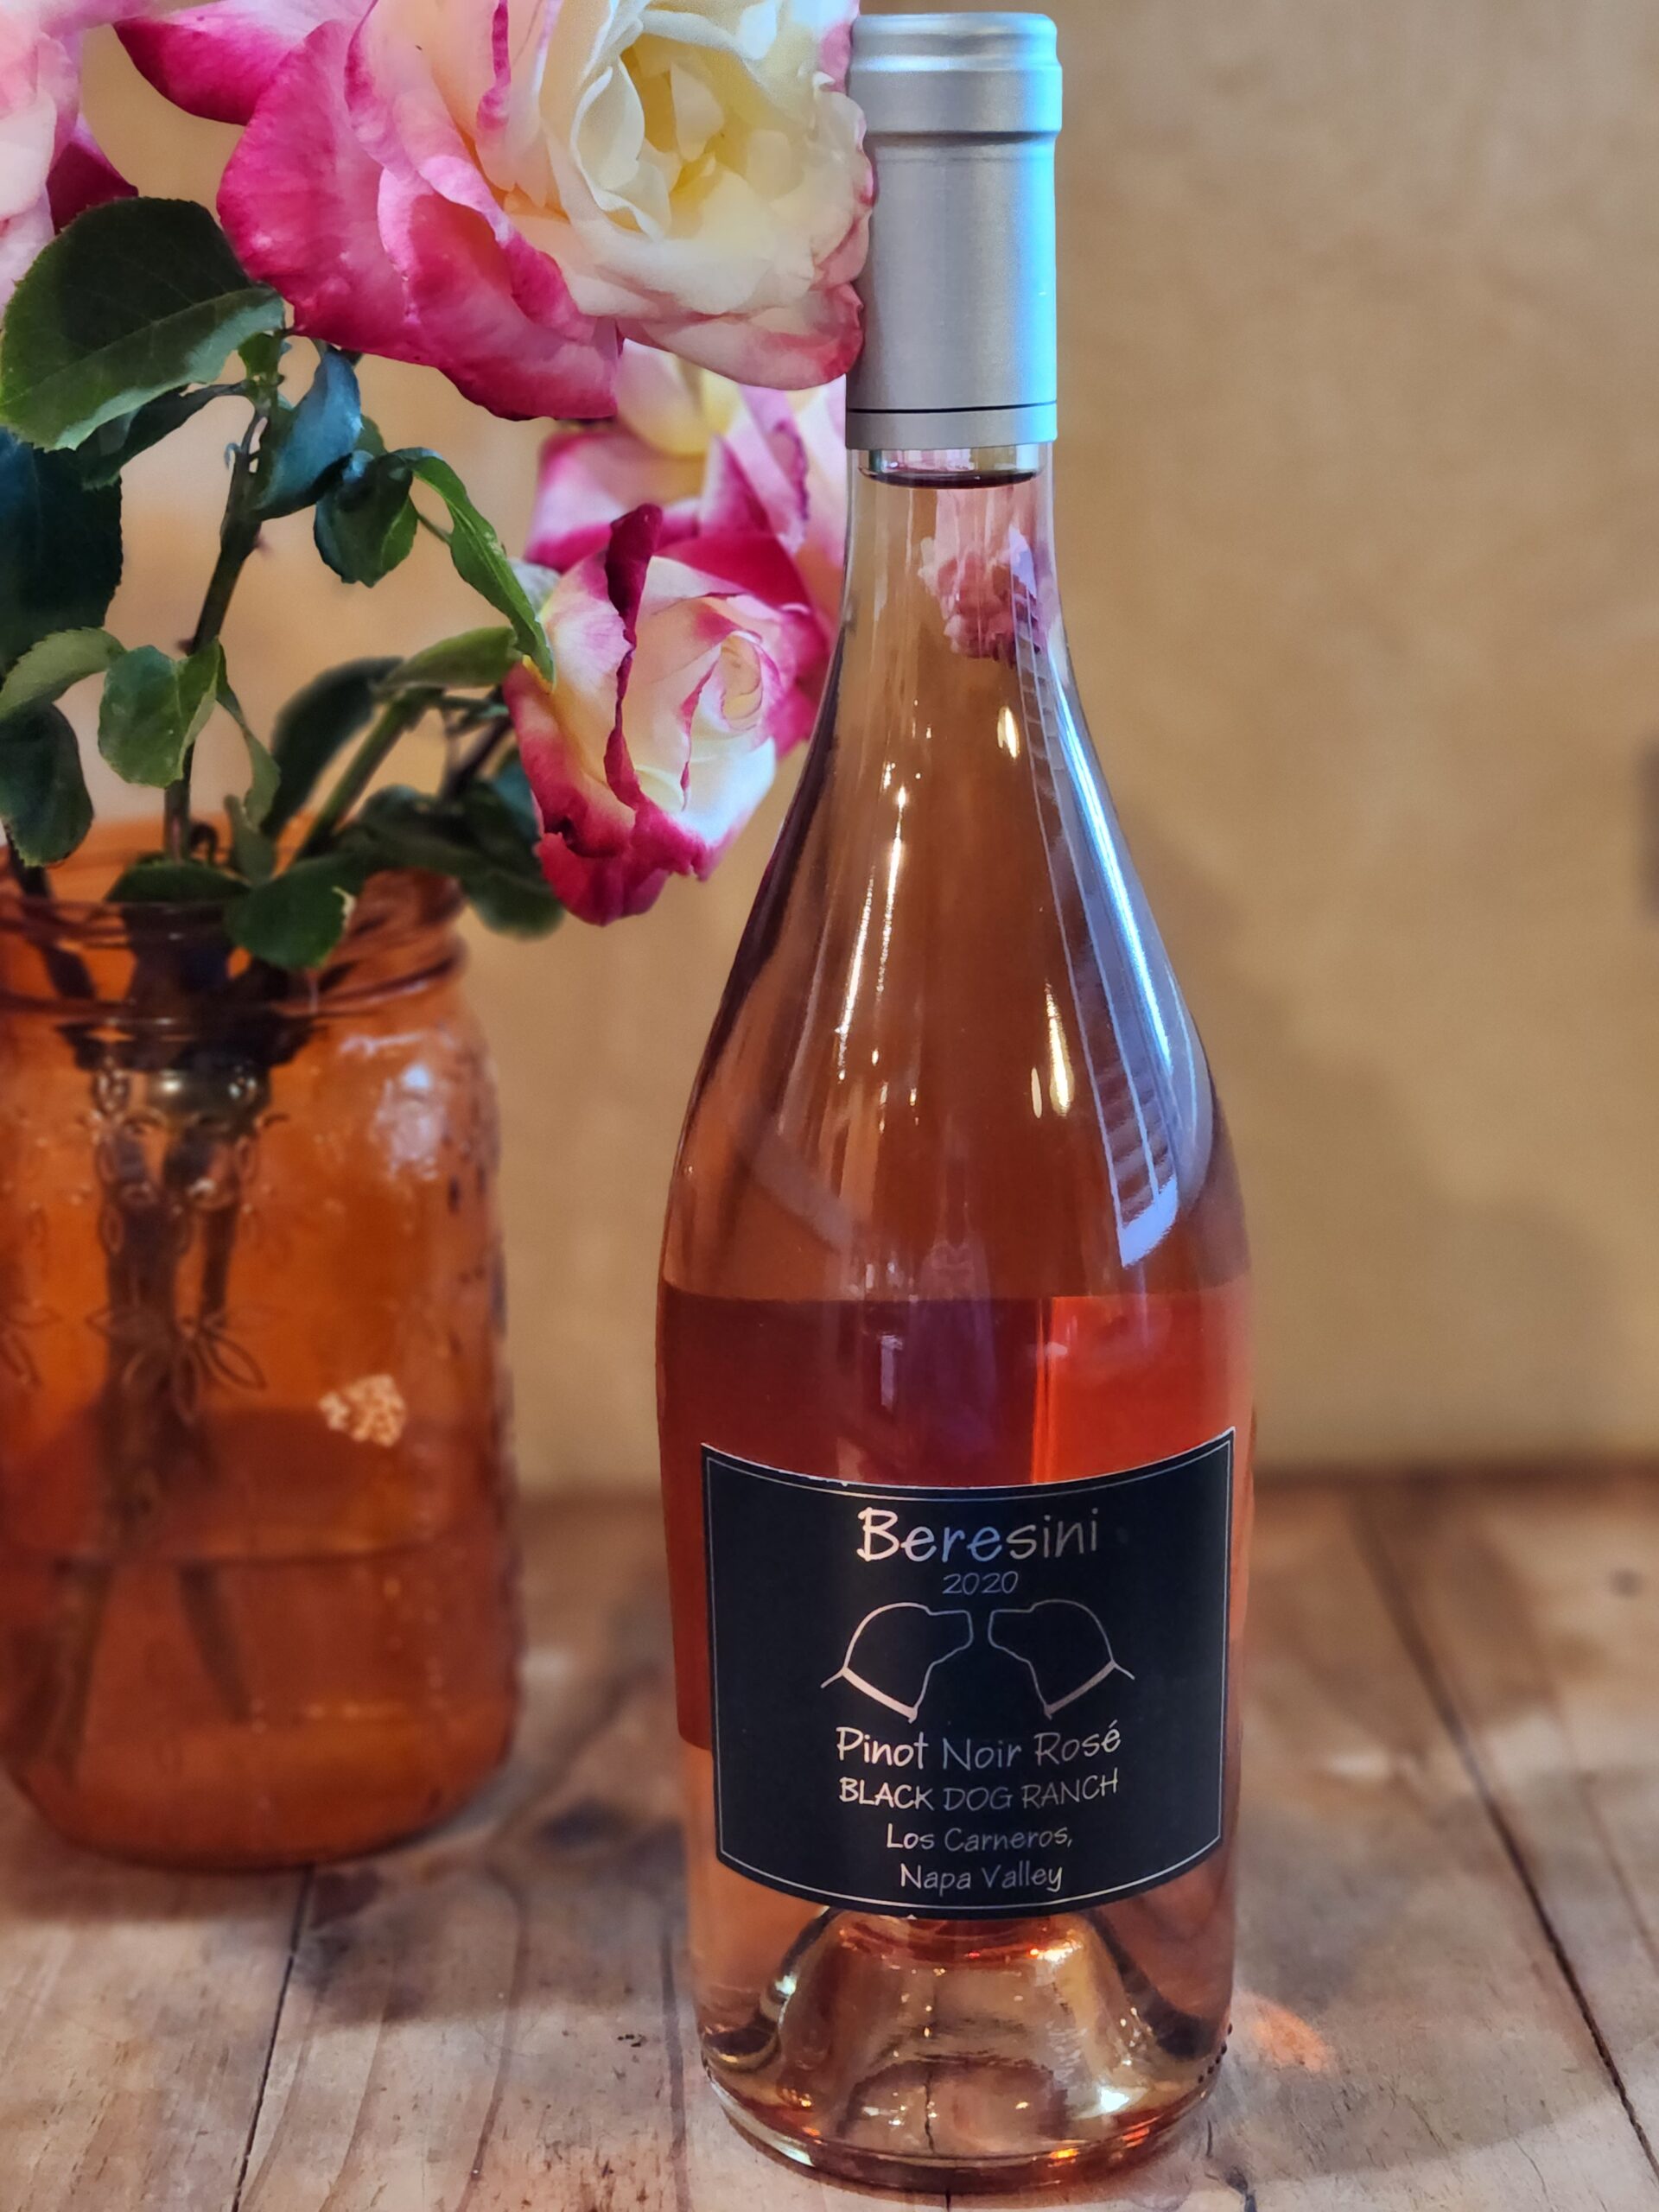 Bottle of 2020 Pinot Noir Rose on a picnic table next to flowers in a vase